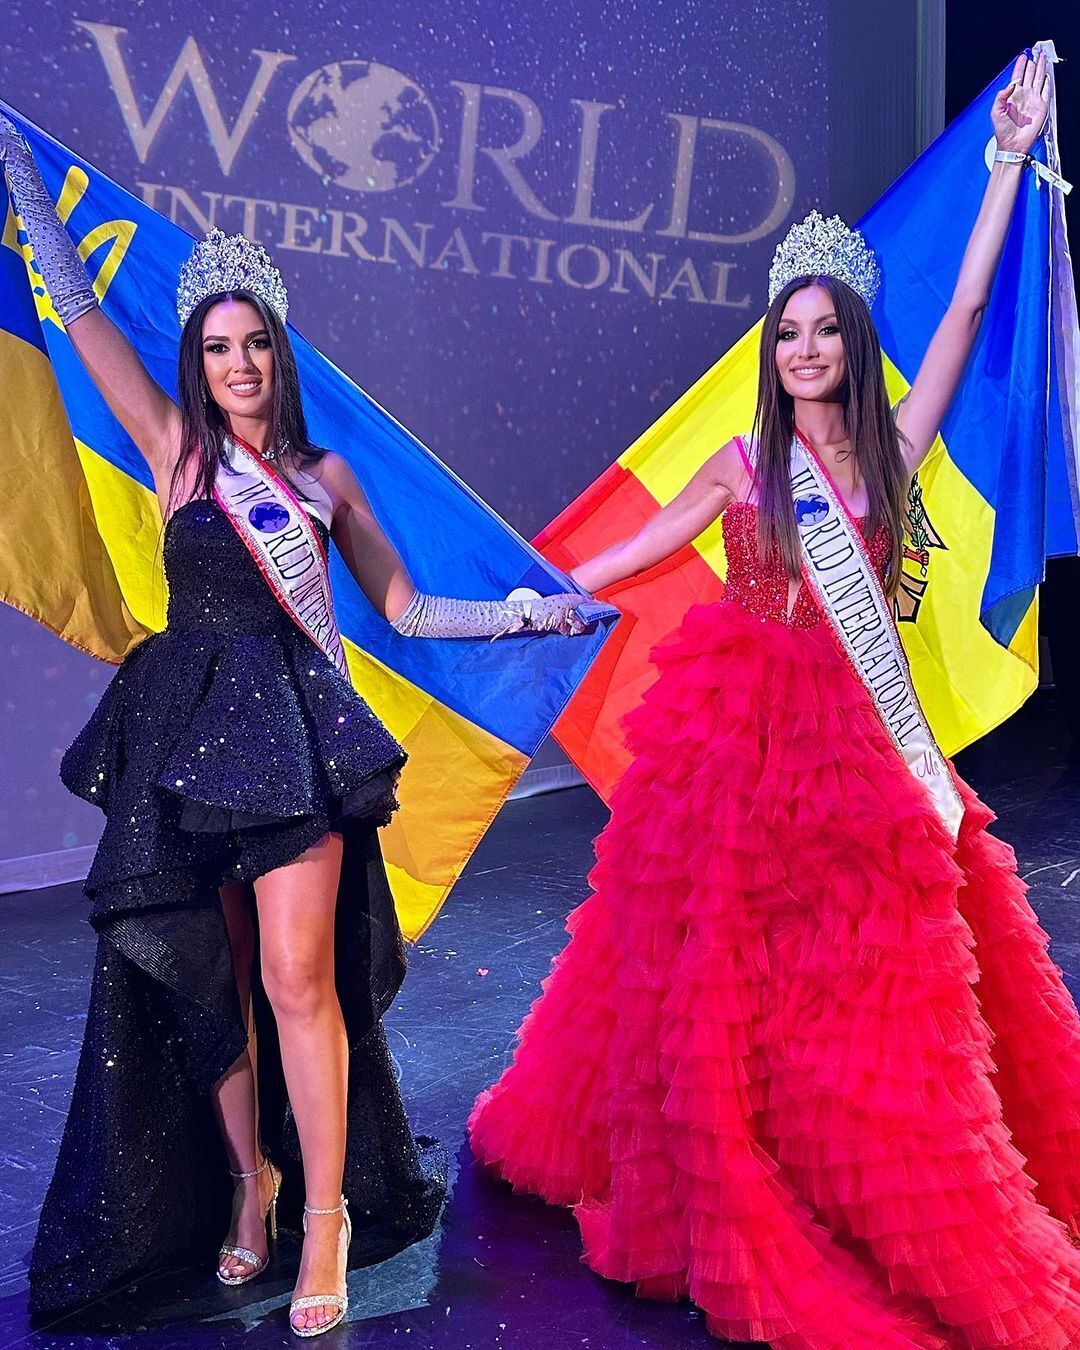 Holding hands with the Russian: the winner of ''Mrs. World 2023'' from Kherson got into a loud scandal. Photo